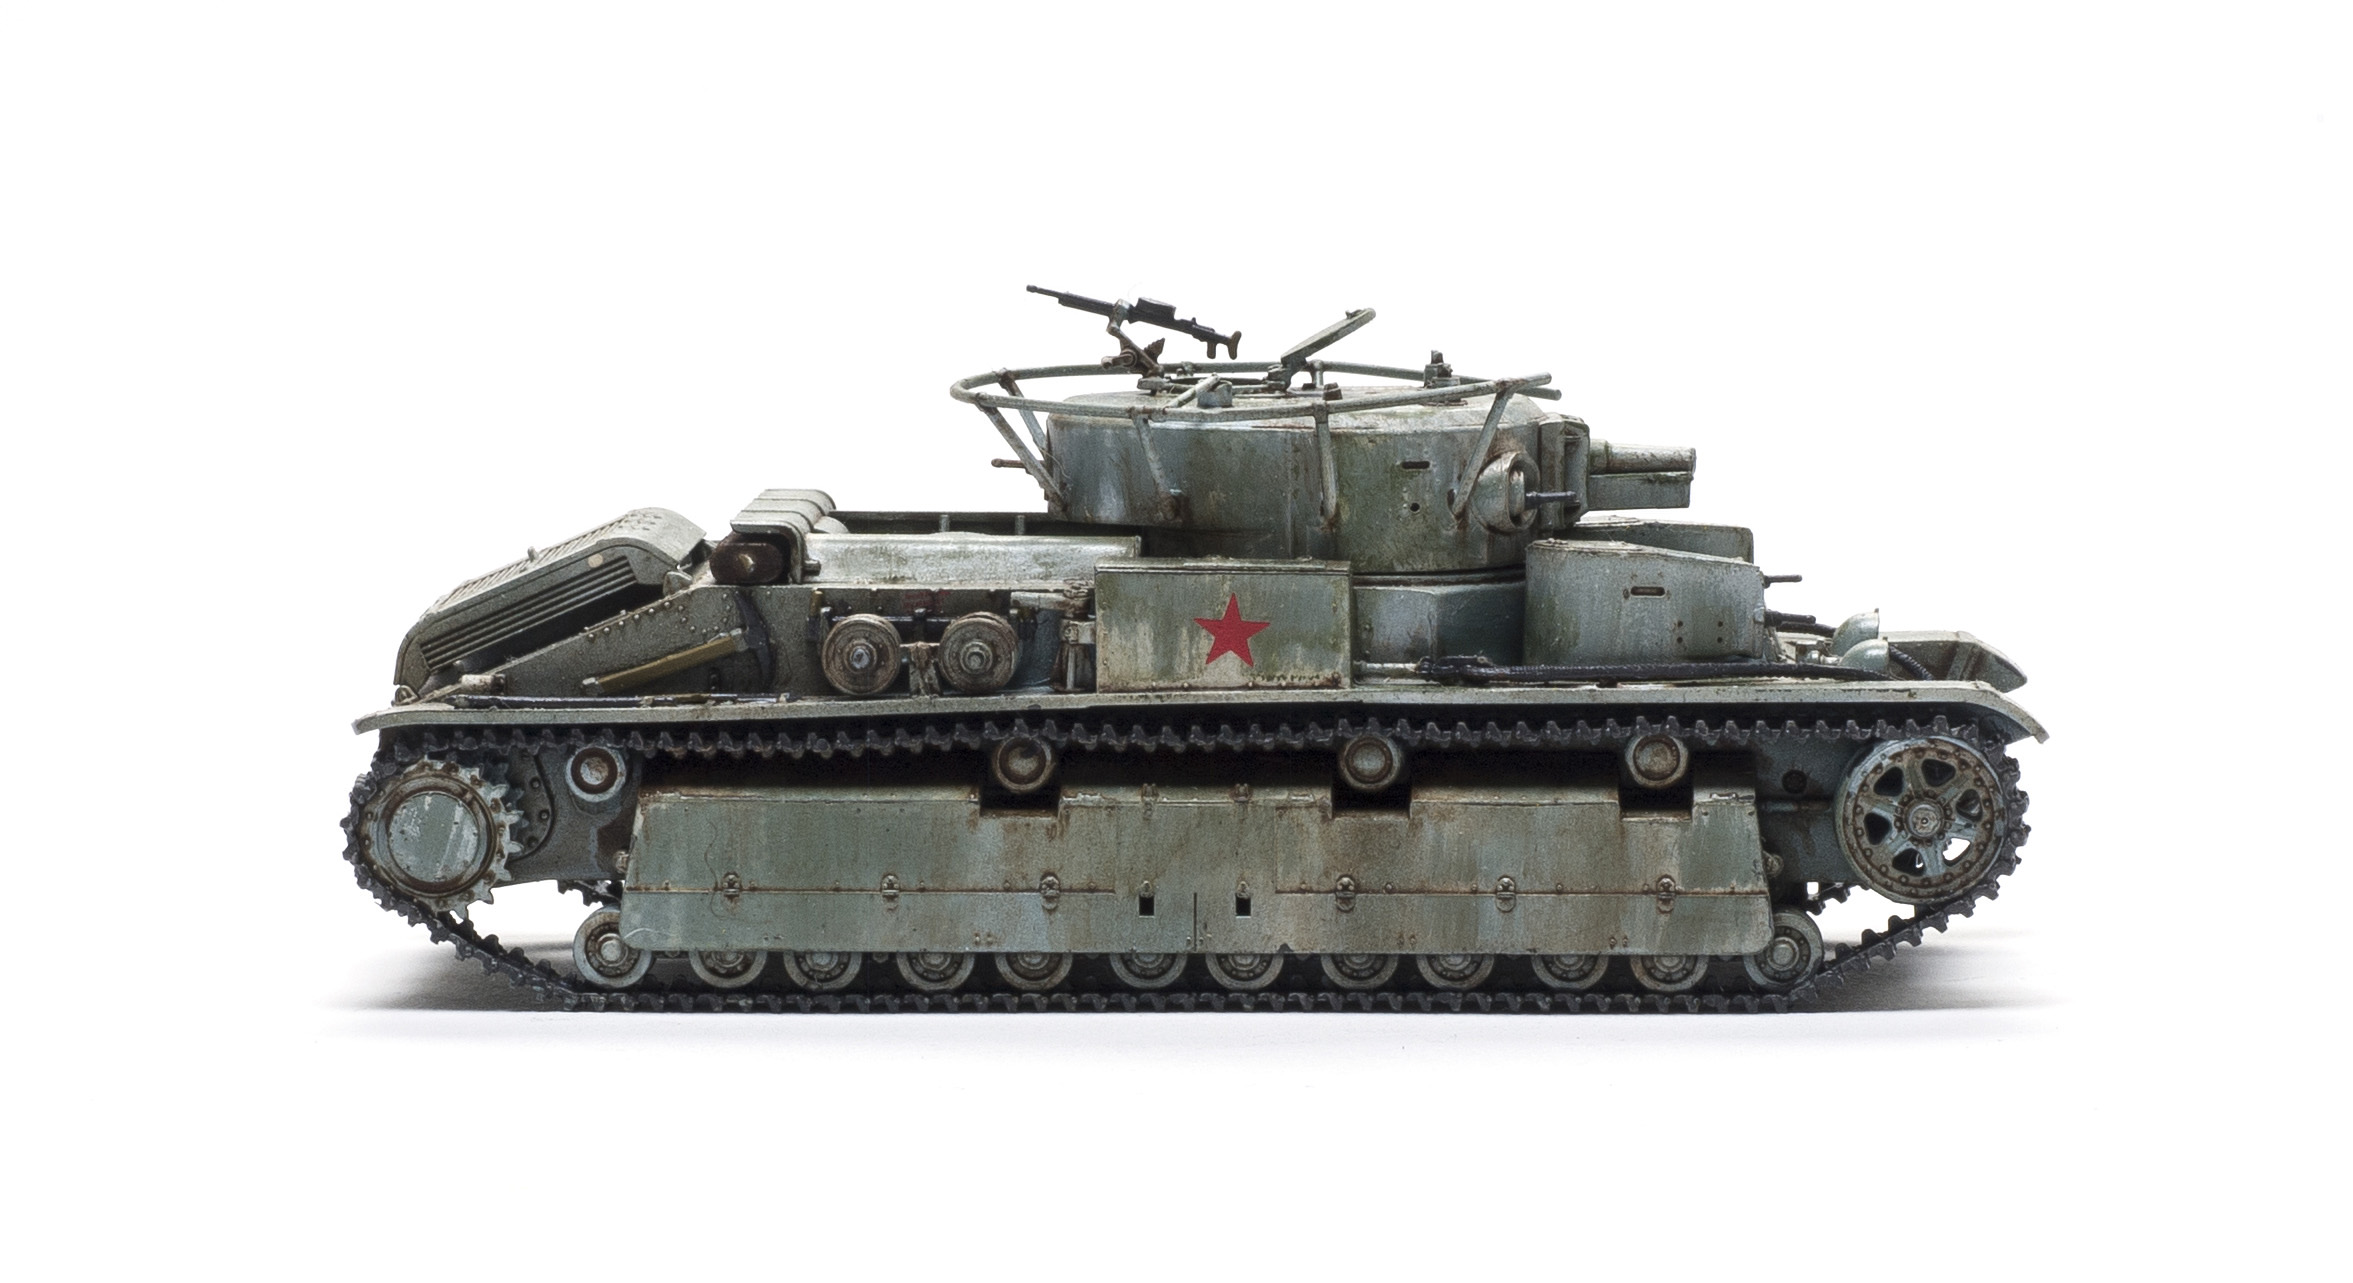 Build review of the Zvezda T28 scale model armor kit | FineScale